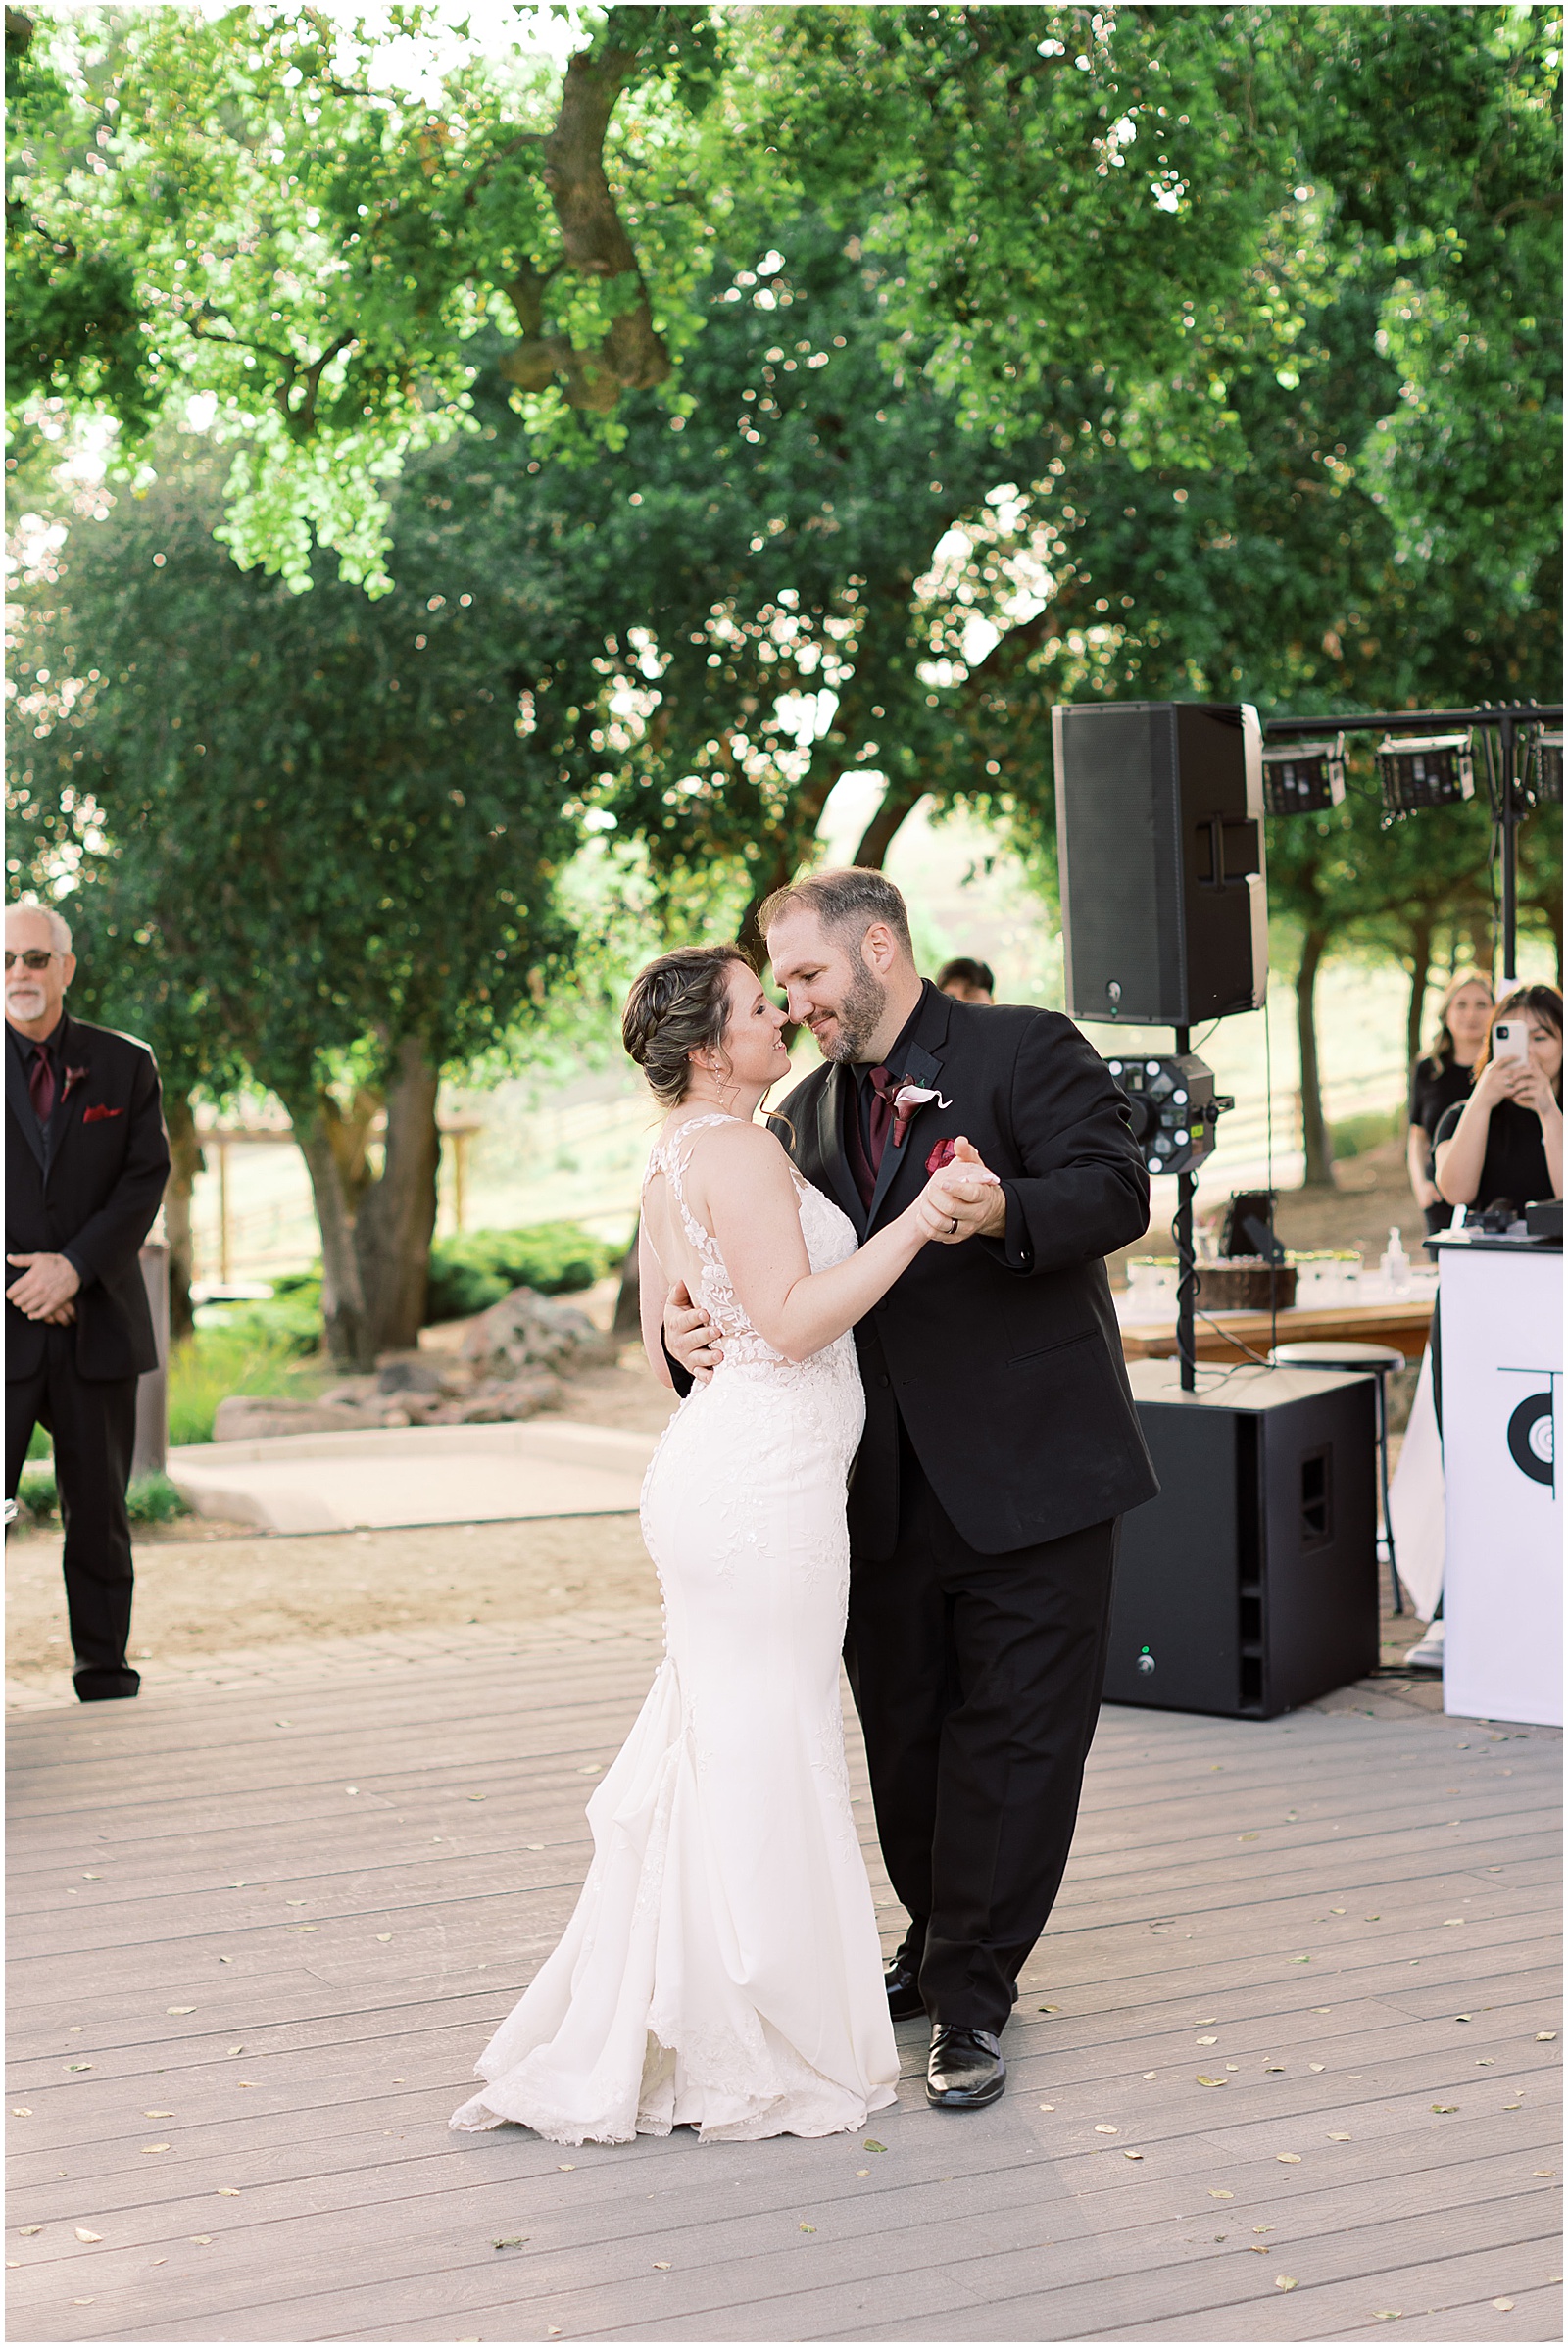 portrait of the bride and groom dancing together